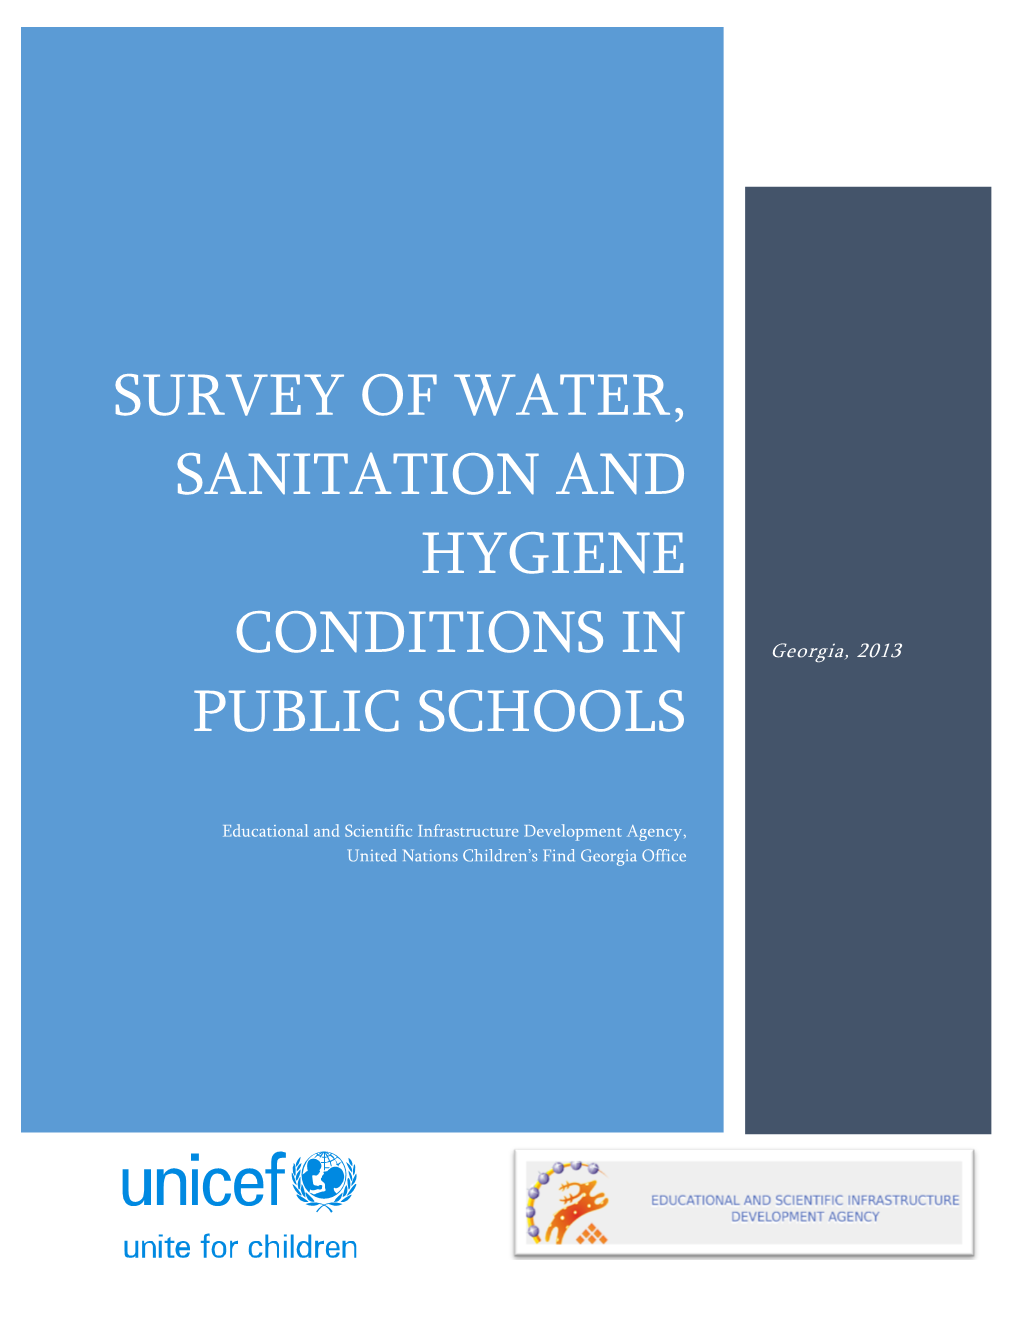 Survey of Water, Sanitation and HYGIENE Conditions in Public Schools